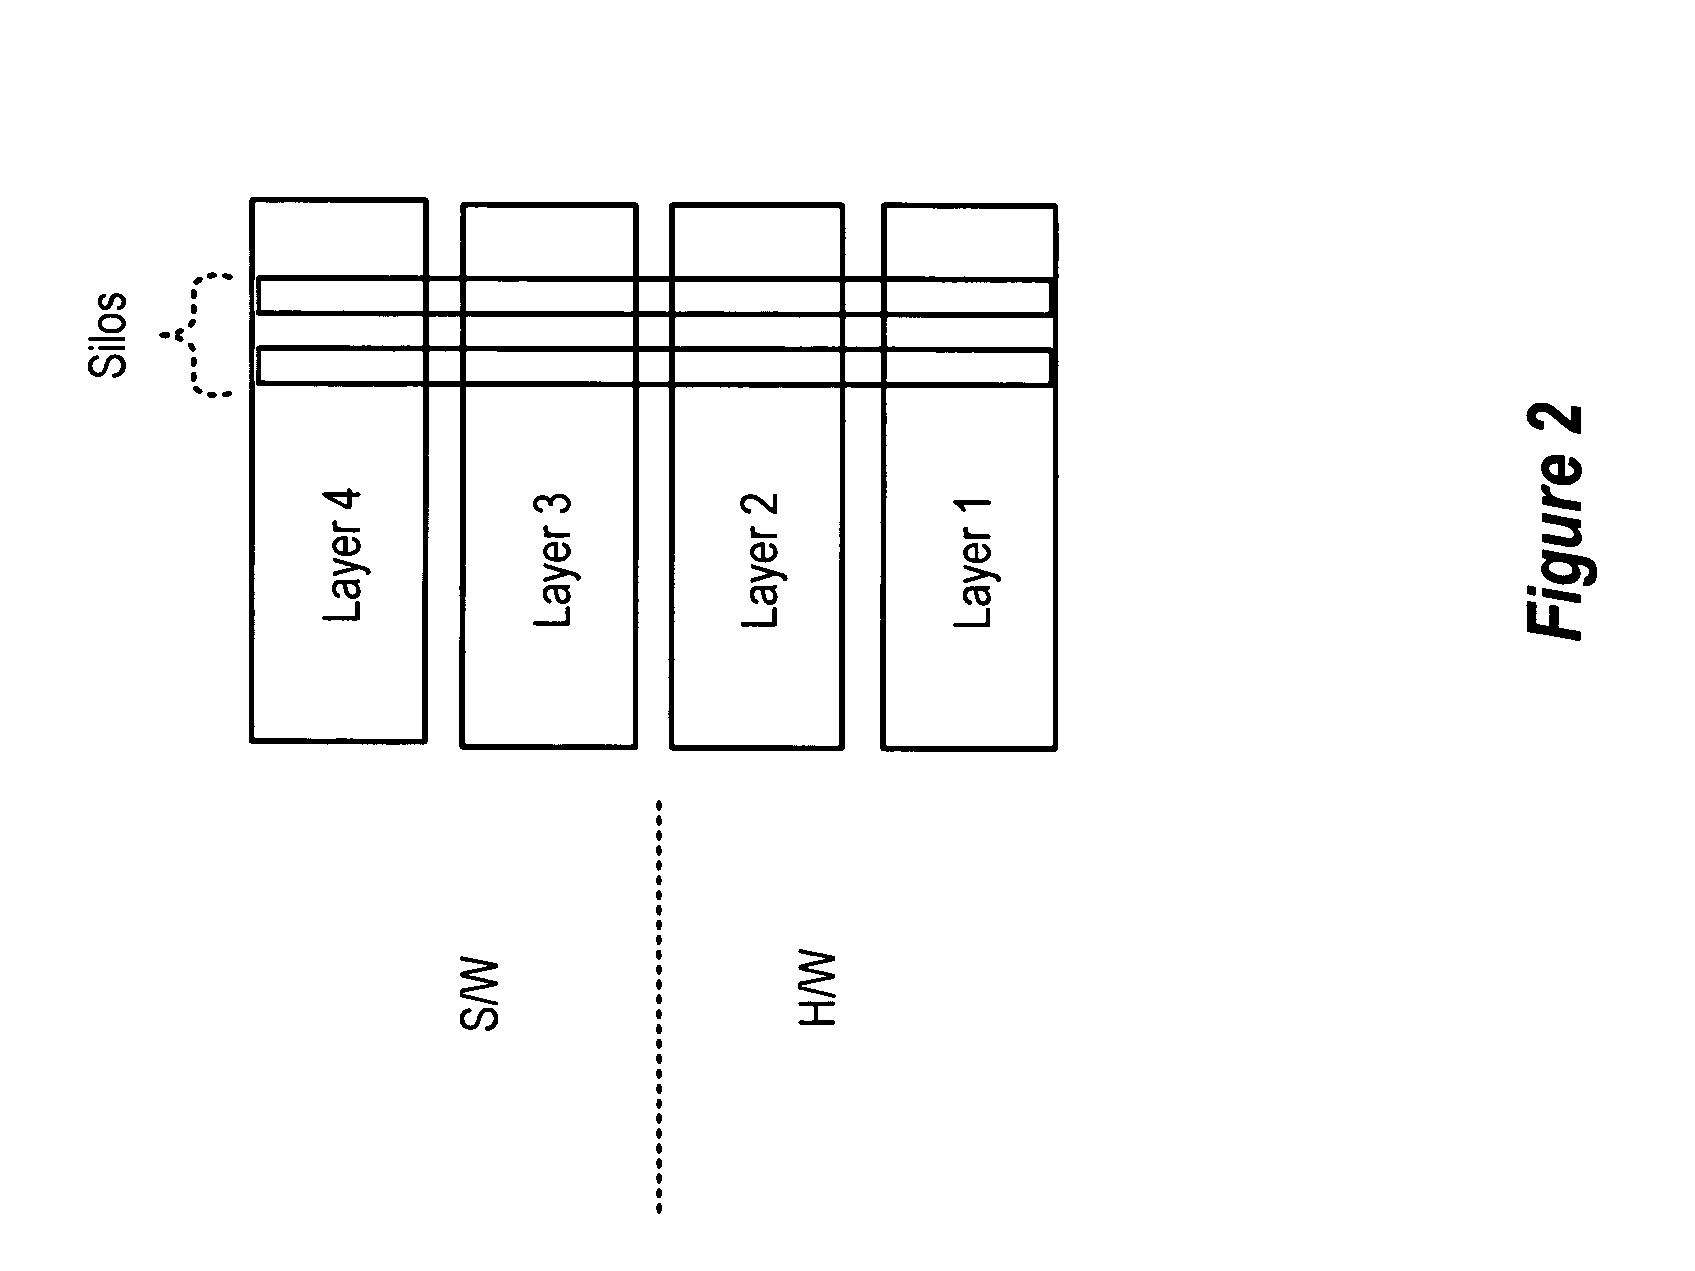 Network system including packet classification for partitioned resources